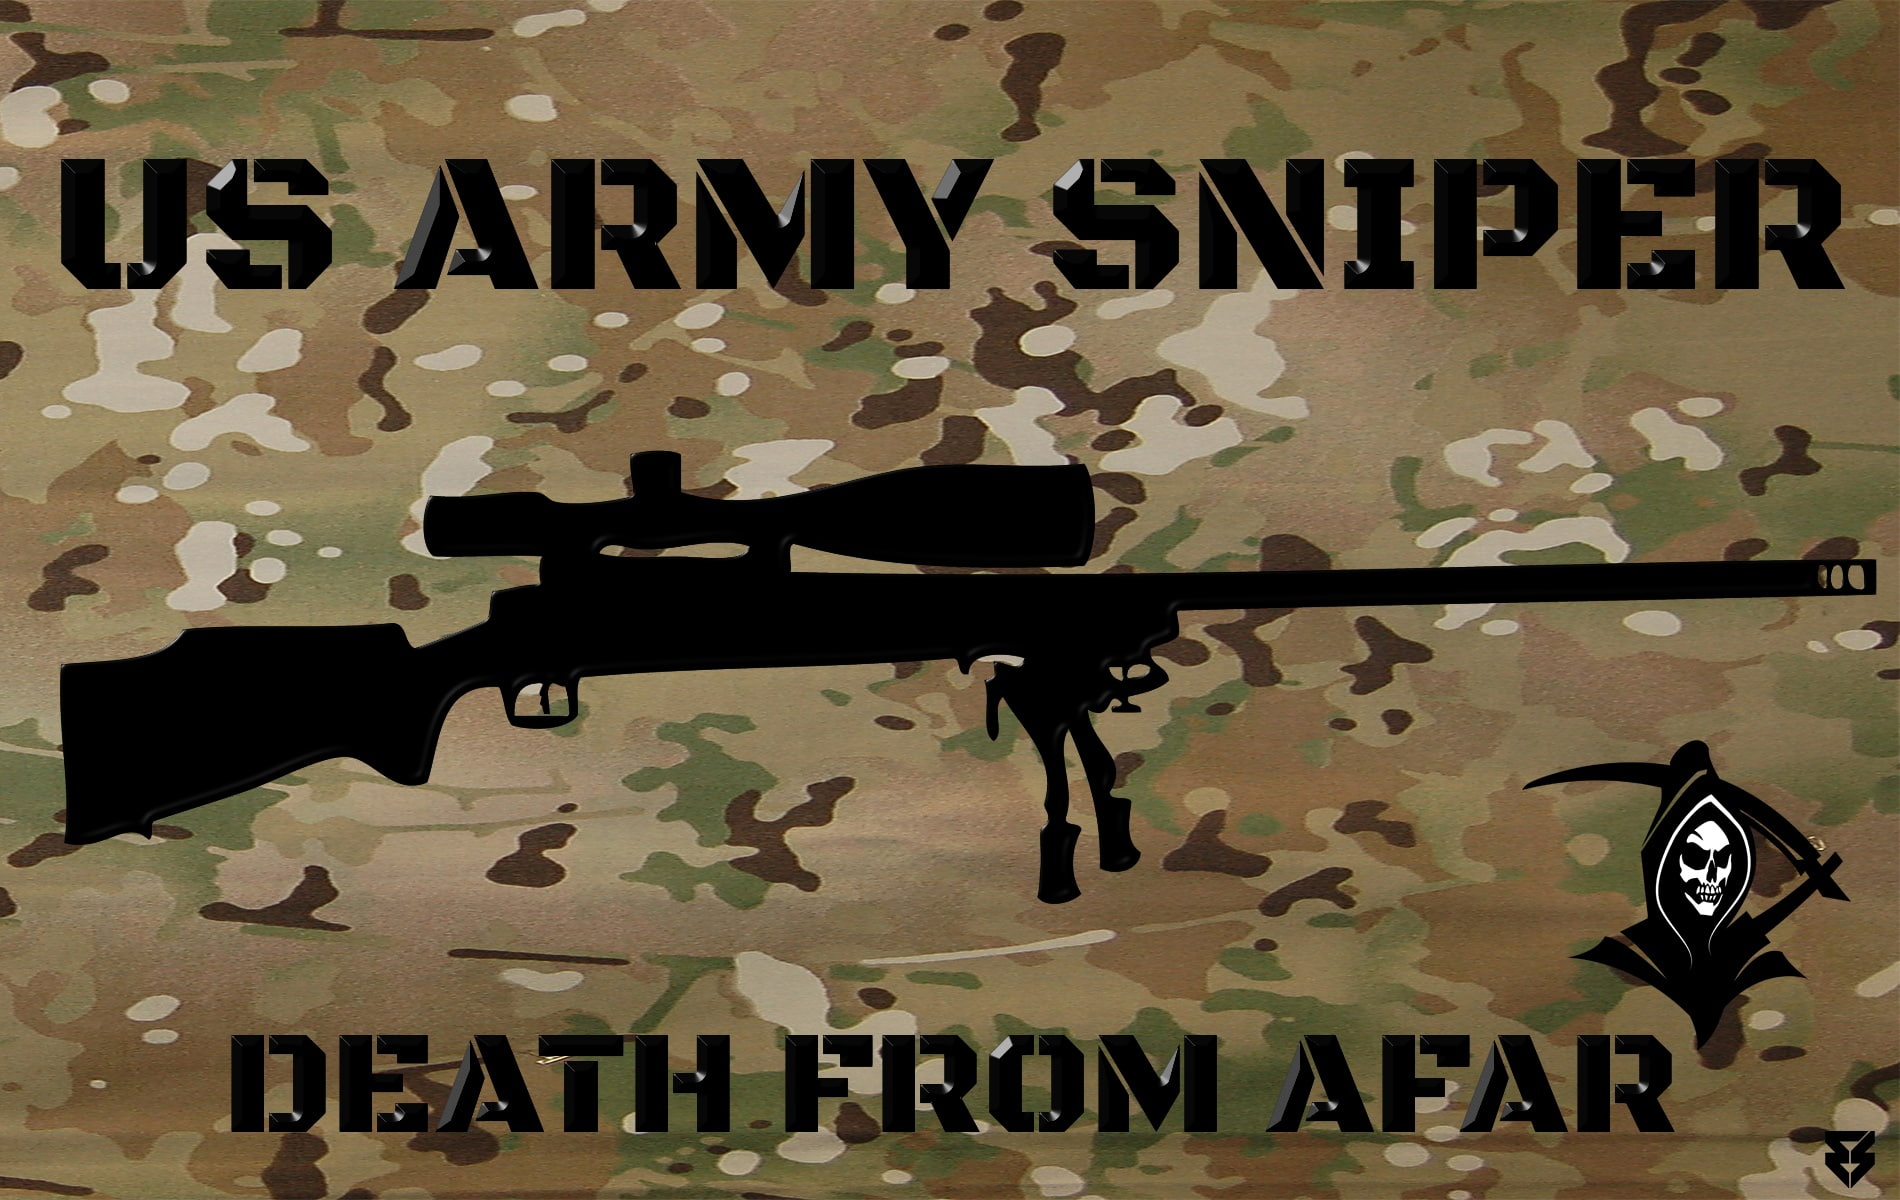 afar, army, death, from, reaper, sniper